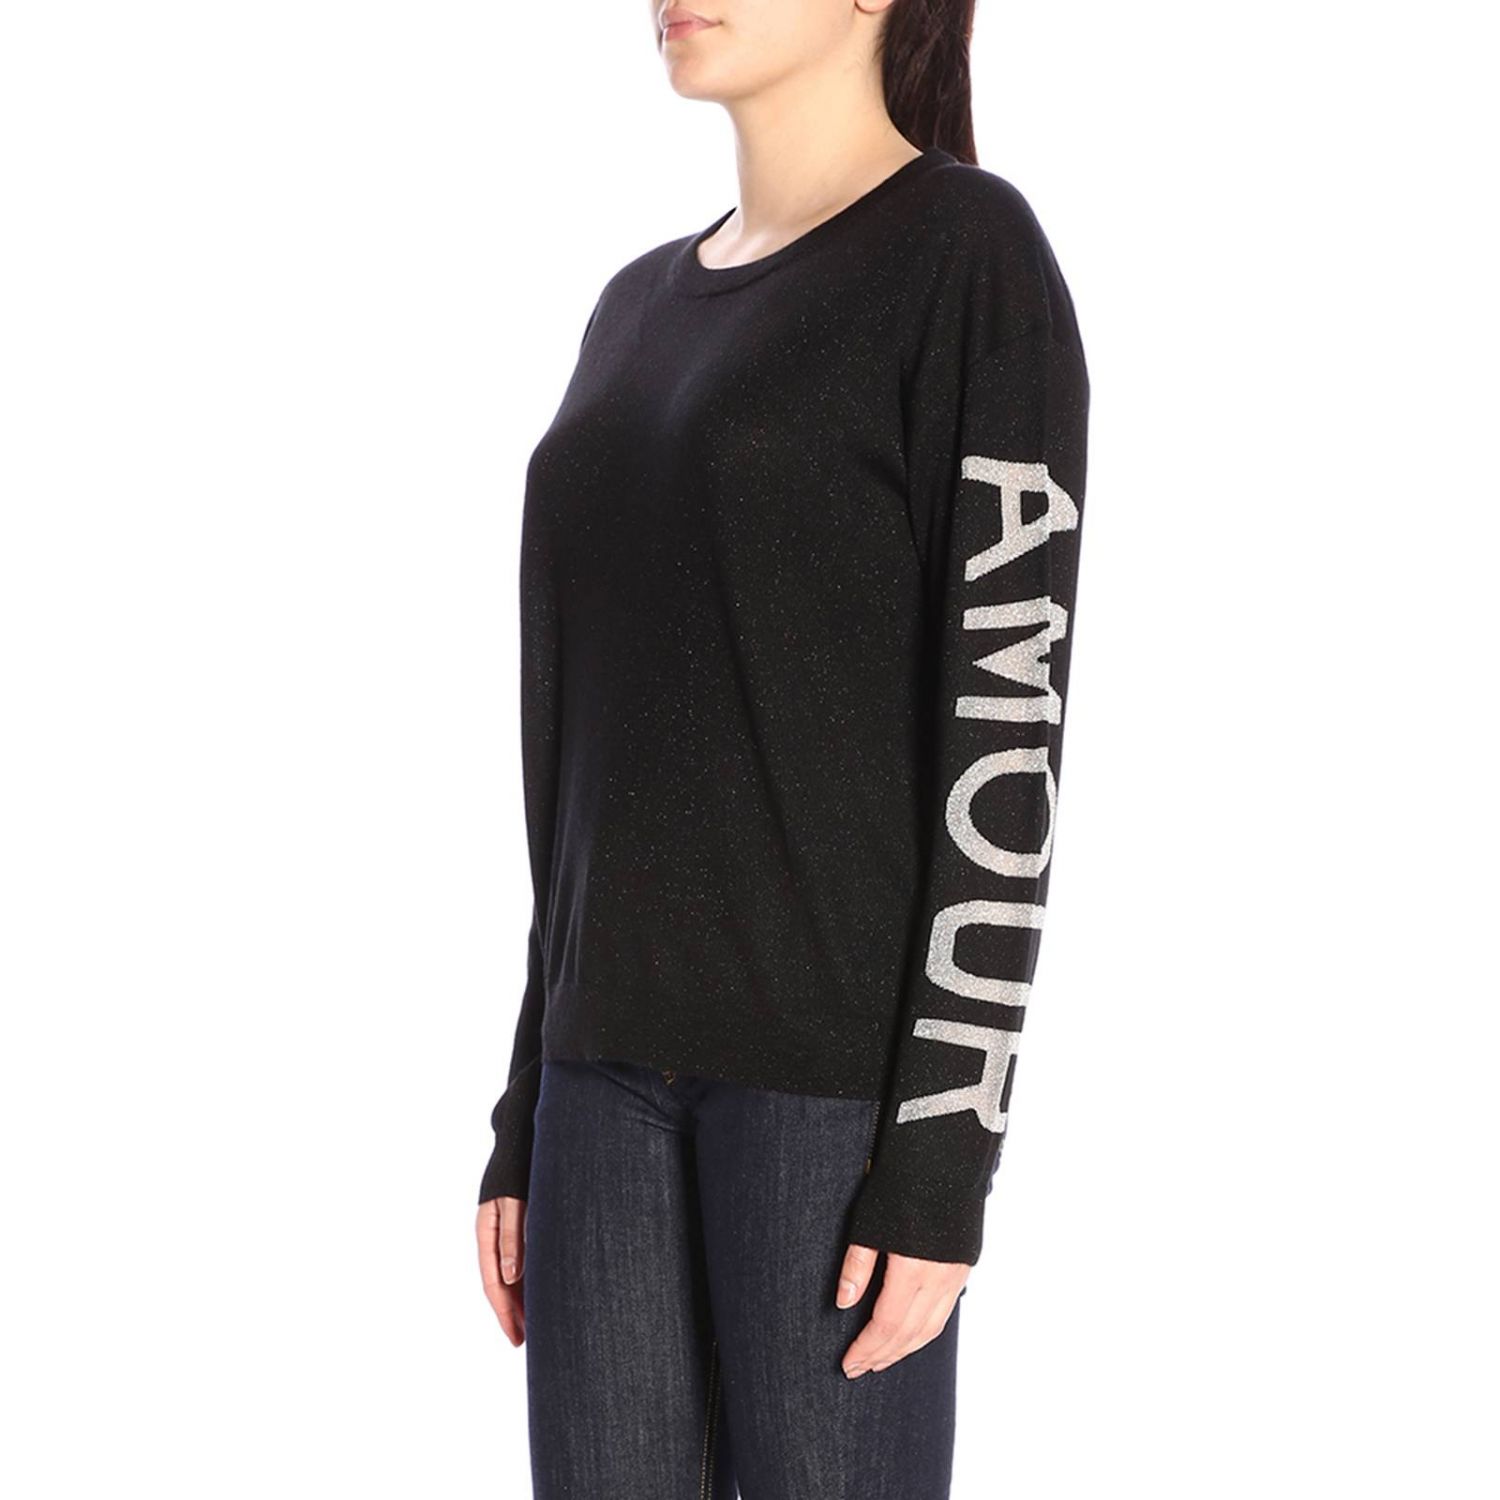 Zadig & Voltaire Outlet: sweater for woman - Black | Zadig & Voltaire ...